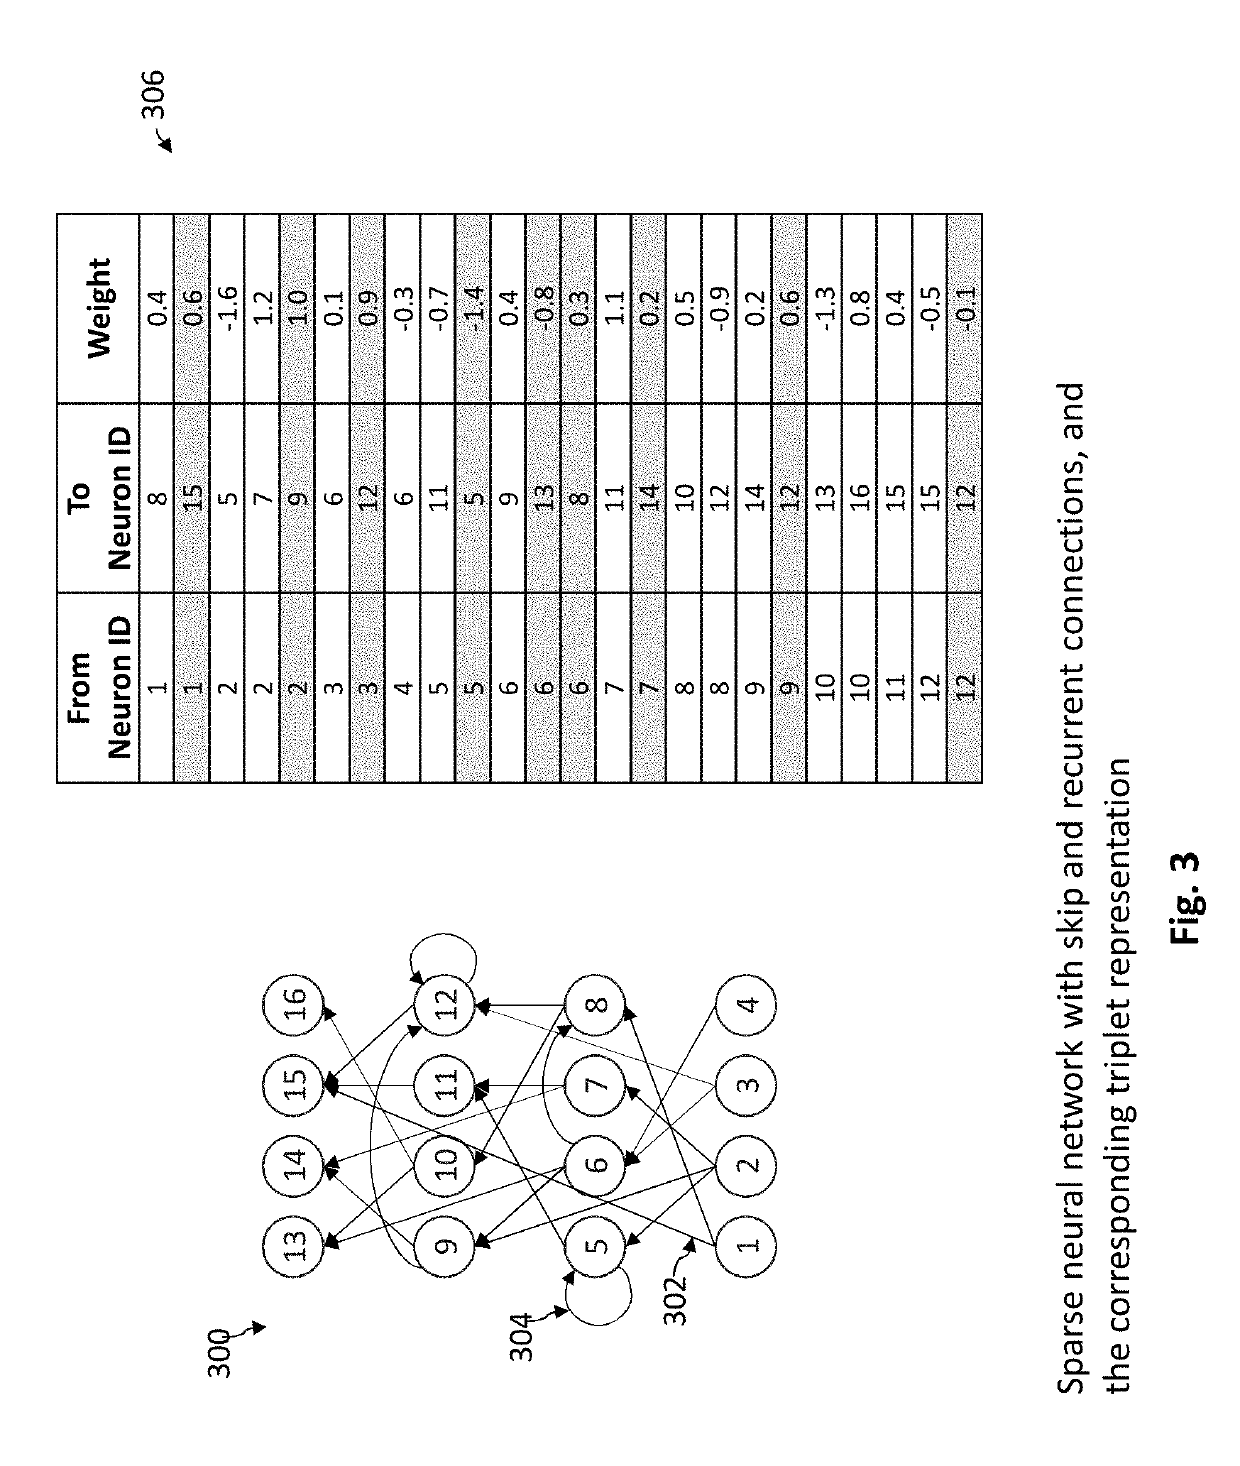 System and method for compact and efficient sparse neural networks